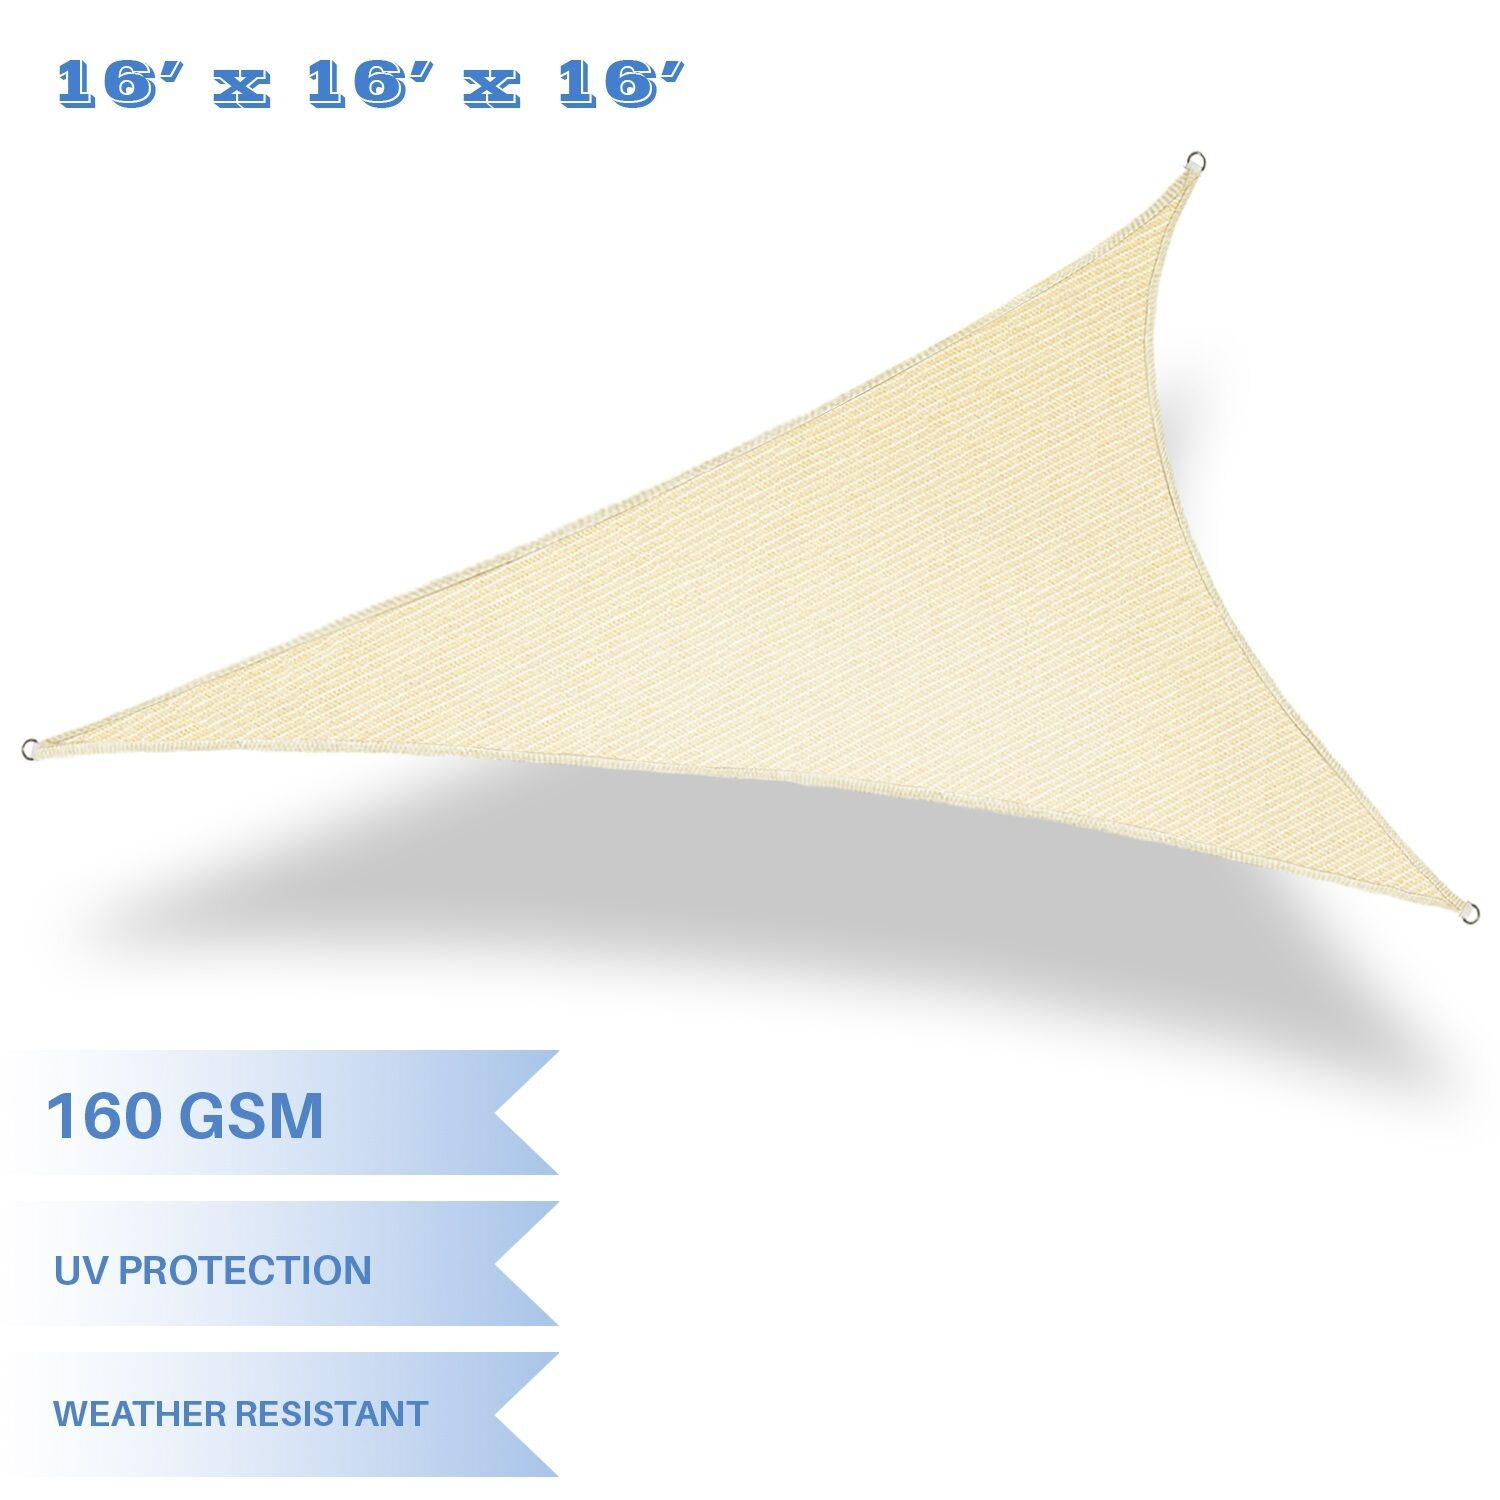 Details About 16x16x16 Beige Triangle Sun Shade Sail Fabric Canopy Patio Cover Garden Pergola for sizing 1500 X 1500